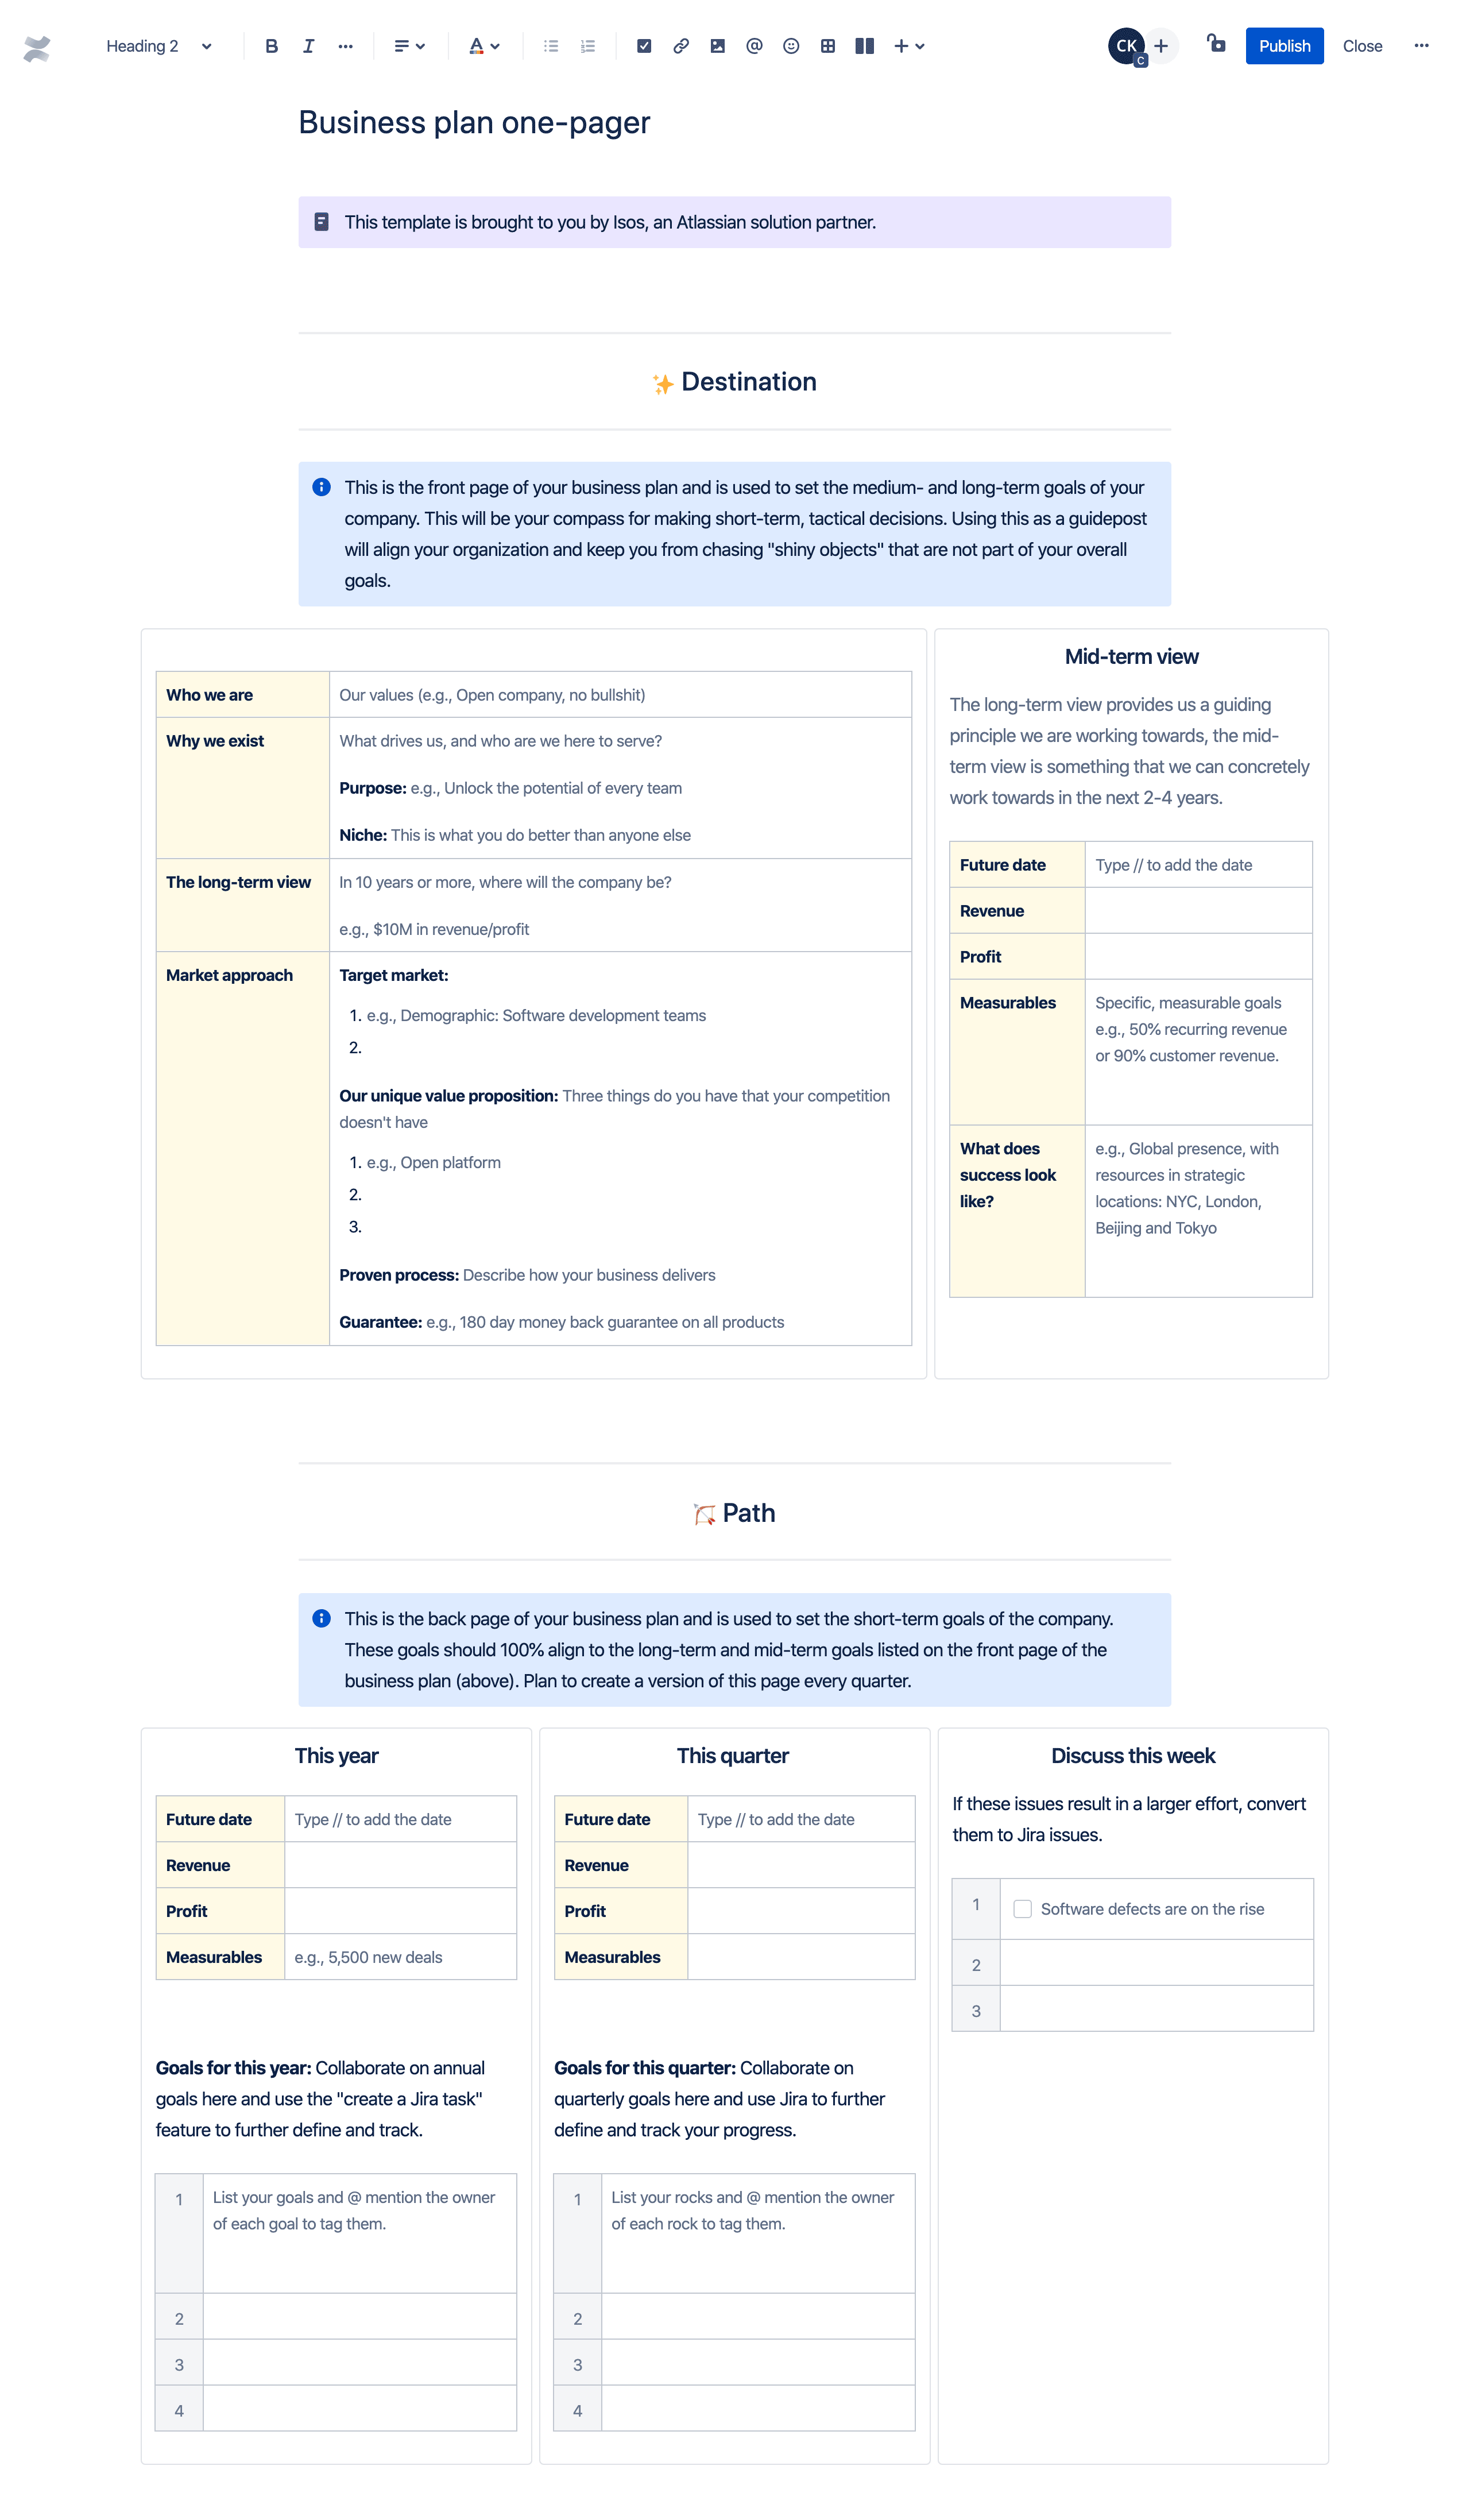 business-plan-one-pager-template-atlassian